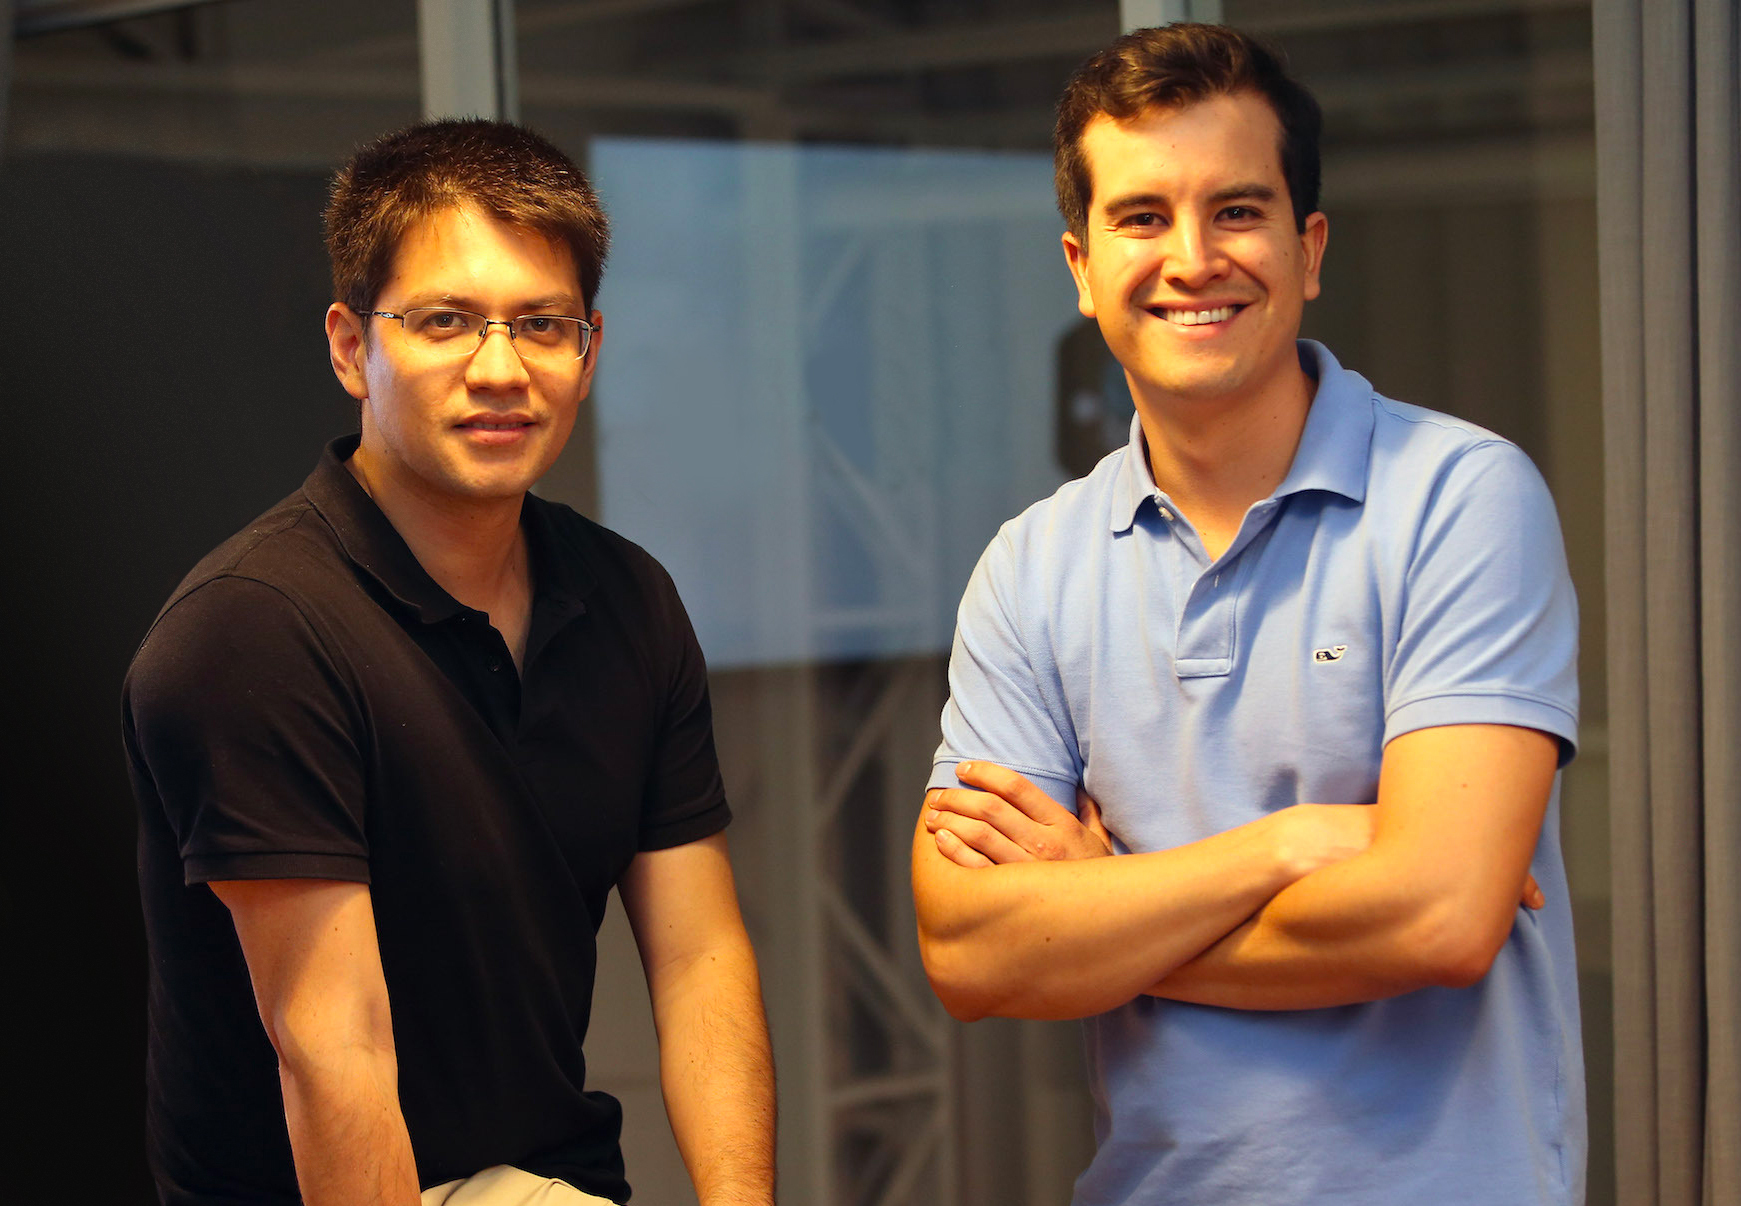 David Grandes and Andres Andrade, ZAK’s co-founders and co-CEOs, ZAK